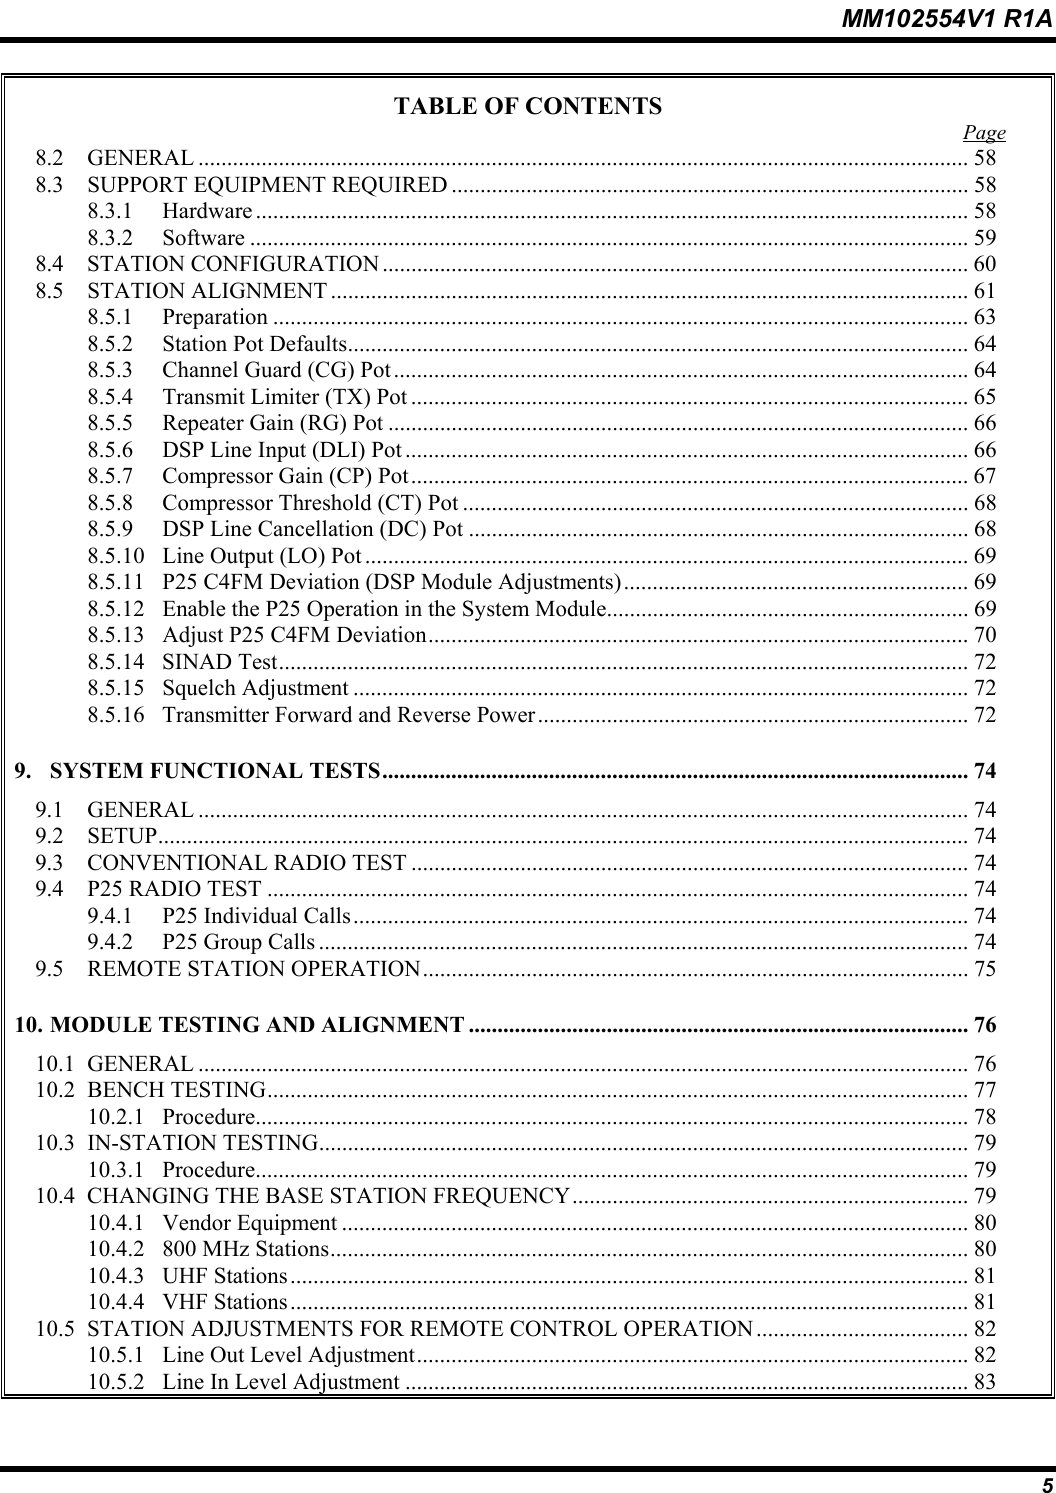 MM102554V1 R1A  5 TABLE OF CONTENTS  Page 8.2 GENERAL ...................................................................................................................................... 58 8.3  SUPPORT EQUIPMENT REQUIRED .......................................................................................... 58 8.3.1 Hardware ............................................................................................................................ 58 8.3.2 Software ............................................................................................................................. 59 8.4 STATION CONFIGURATION ...................................................................................................... 60 8.5 STATION ALIGNMENT ............................................................................................................... 61 8.5.1 Preparation ......................................................................................................................... 63 8.5.2  Station Pot Defaults............................................................................................................ 64 8.5.3  Channel Guard (CG) Pot .................................................................................................... 64 8.5.4  Transmit Limiter (TX) Pot ................................................................................................. 65 8.5.5  Repeater Gain (RG) Pot ..................................................................................................... 66 8.5.6  DSP Line Input (DLI) Pot .................................................................................................. 66 8.5.7  Compressor Gain (CP) Pot................................................................................................. 67 8.5.8  Compressor Threshold (CT) Pot ........................................................................................ 68 8.5.9  DSP Line Cancellation (DC) Pot ....................................................................................... 68 8.5.10  Line Output (LO) Pot ......................................................................................................... 69 8.5.11  P25 C4FM Deviation (DSP Module Adjustments)............................................................ 69 8.5.12  Enable the P25 Operation in the System Module............................................................... 69 8.5.13  Adjust P25 C4FM Deviation.............................................................................................. 70 8.5.14 SINAD Test........................................................................................................................ 72 8.5.15 Squelch Adjustment ........................................................................................................... 72 8.5.16  Transmitter Forward and Reverse Power........................................................................... 72 9. SYSTEM FUNCTIONAL TESTS...................................................................................................... 74 9.1 GENERAL ...................................................................................................................................... 74 9.2 SETUP............................................................................................................................................. 74 9.3  CONVENTIONAL RADIO TEST ................................................................................................. 74 9.4  P25 RADIO TEST .......................................................................................................................... 74 9.4.1  P25 Individual Calls........................................................................................................... 74 9.4.2  P25 Group Calls ................................................................................................................. 74 9.5  REMOTE STATION OPERATION............................................................................................... 75 10. MODULE TESTING AND ALIGNMENT ....................................................................................... 76 10.1 GENERAL ...................................................................................................................................... 76 10.2 BENCH TESTING.......................................................................................................................... 77 10.2.1 Procedure............................................................................................................................ 78 10.3 IN-STATION TESTING................................................................................................................. 79 10.3.1 Procedure............................................................................................................................ 79 10.4  CHANGING THE BASE STATION FREQUENCY..................................................................... 79 10.4.1 Vendor Equipment ............................................................................................................. 80 10.4.2  800 MHz Stations............................................................................................................... 80 10.4.3 UHF Stations...................................................................................................................... 81 10.4.4 VHF Stations...................................................................................................................... 81 10.5  STATION ADJUSTMENTS FOR REMOTE CONTROL OPERATION ..................................... 82 10.5.1  Line Out Level Adjustment................................................................................................ 82 10.5.2  Line In Level Adjustment .................................................................................................. 83 